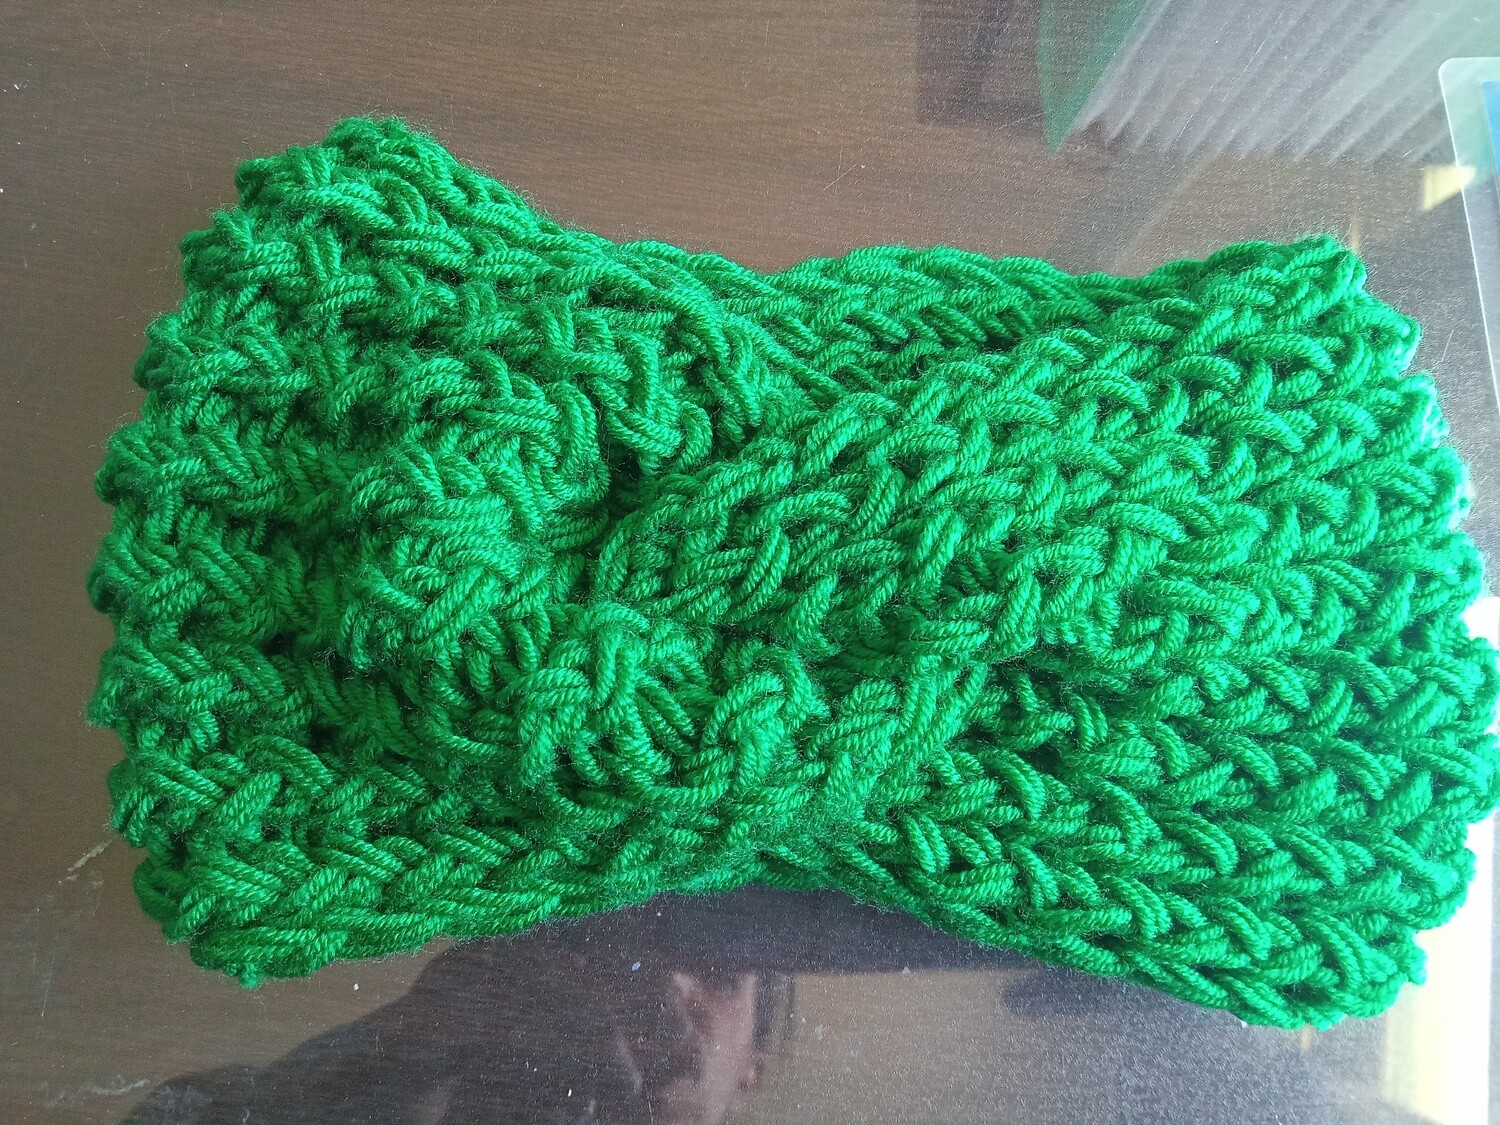 Knot Head or Neck Band (child's size)